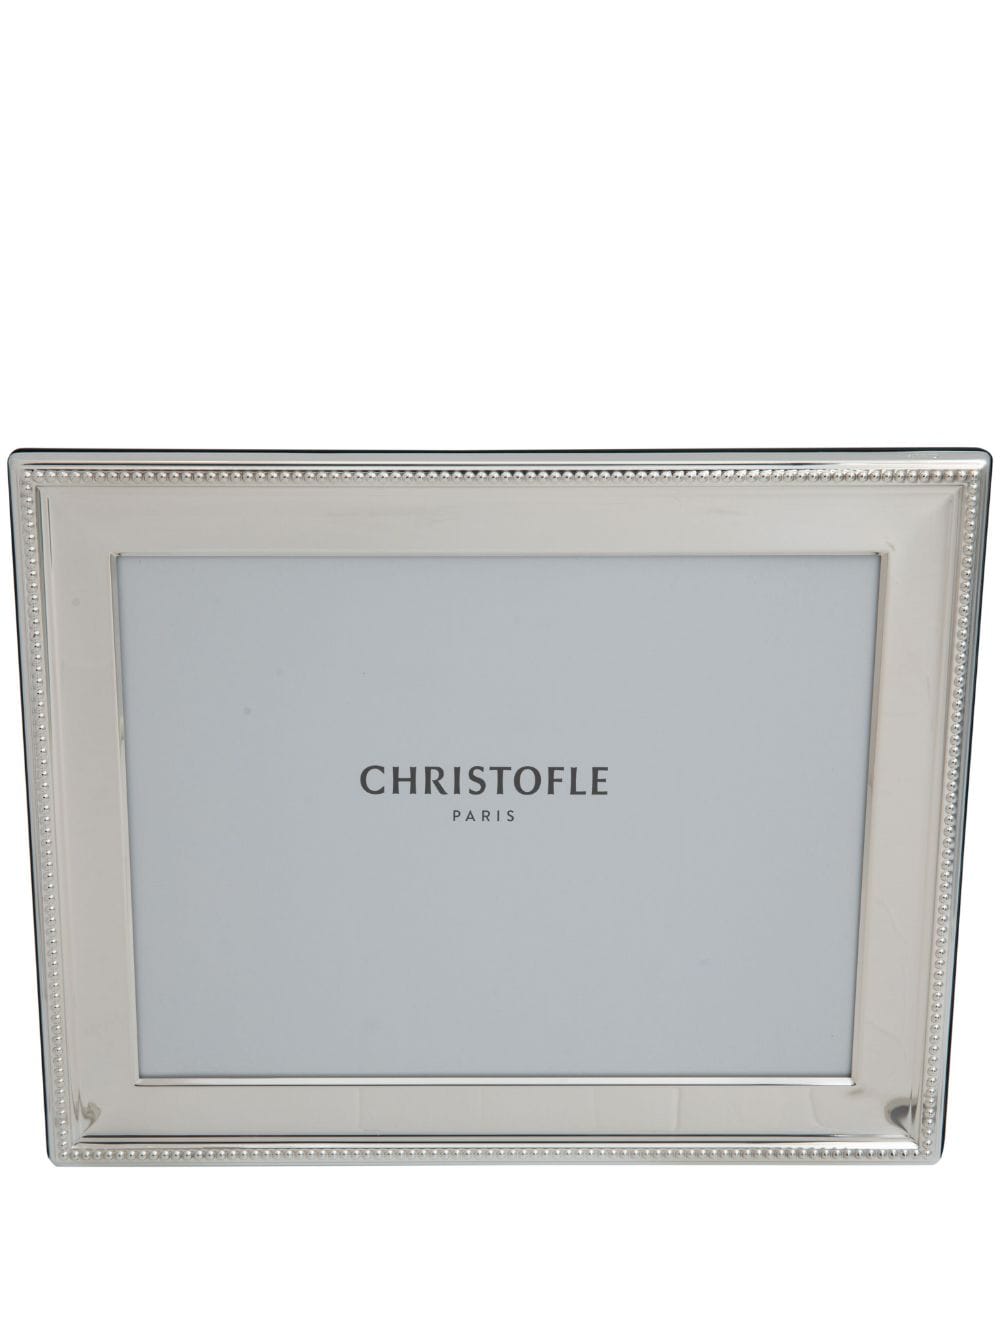 Christofle Perles silver-plated picture frame (18x24cm) von Christofle